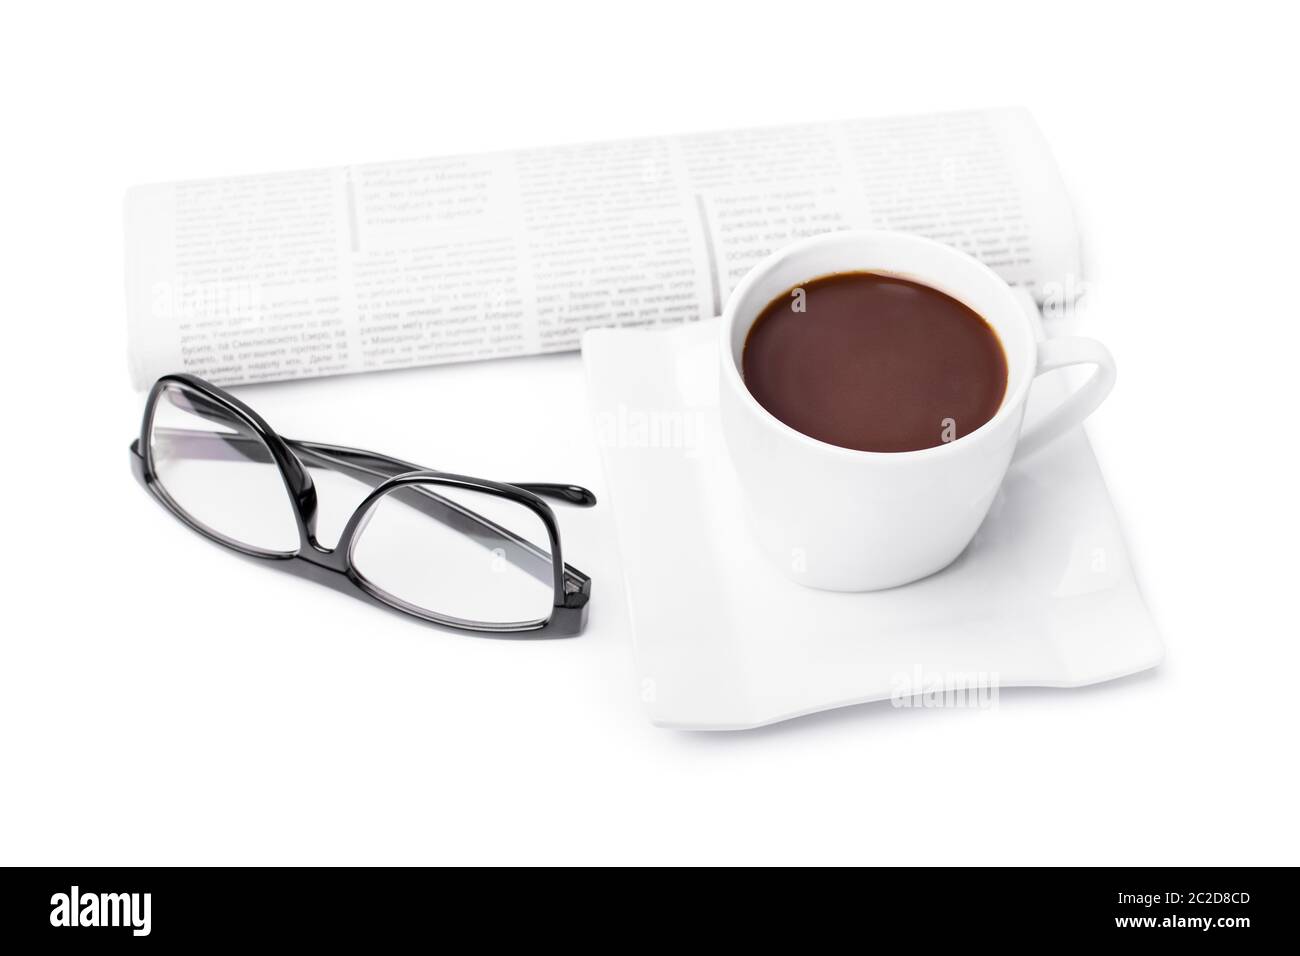 Cup of coffee with a rolled up newspaper and glasses, isolated on white background. My morning routine. Stock Photo